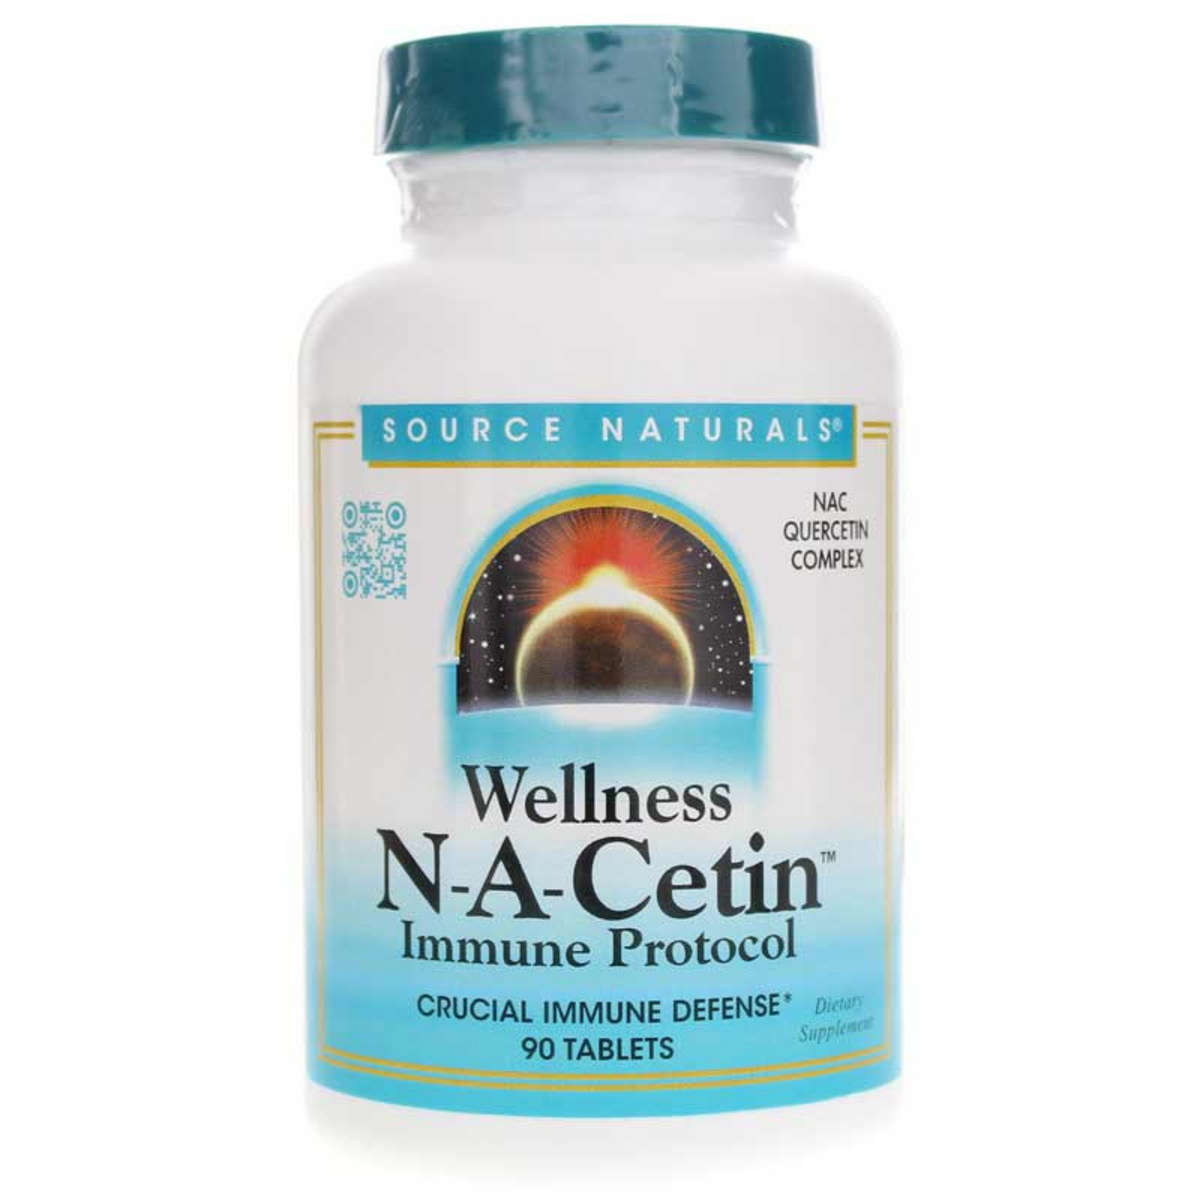 Primary Image of Source Naturals Wellness N-A-Cetin Tablets (90 count)